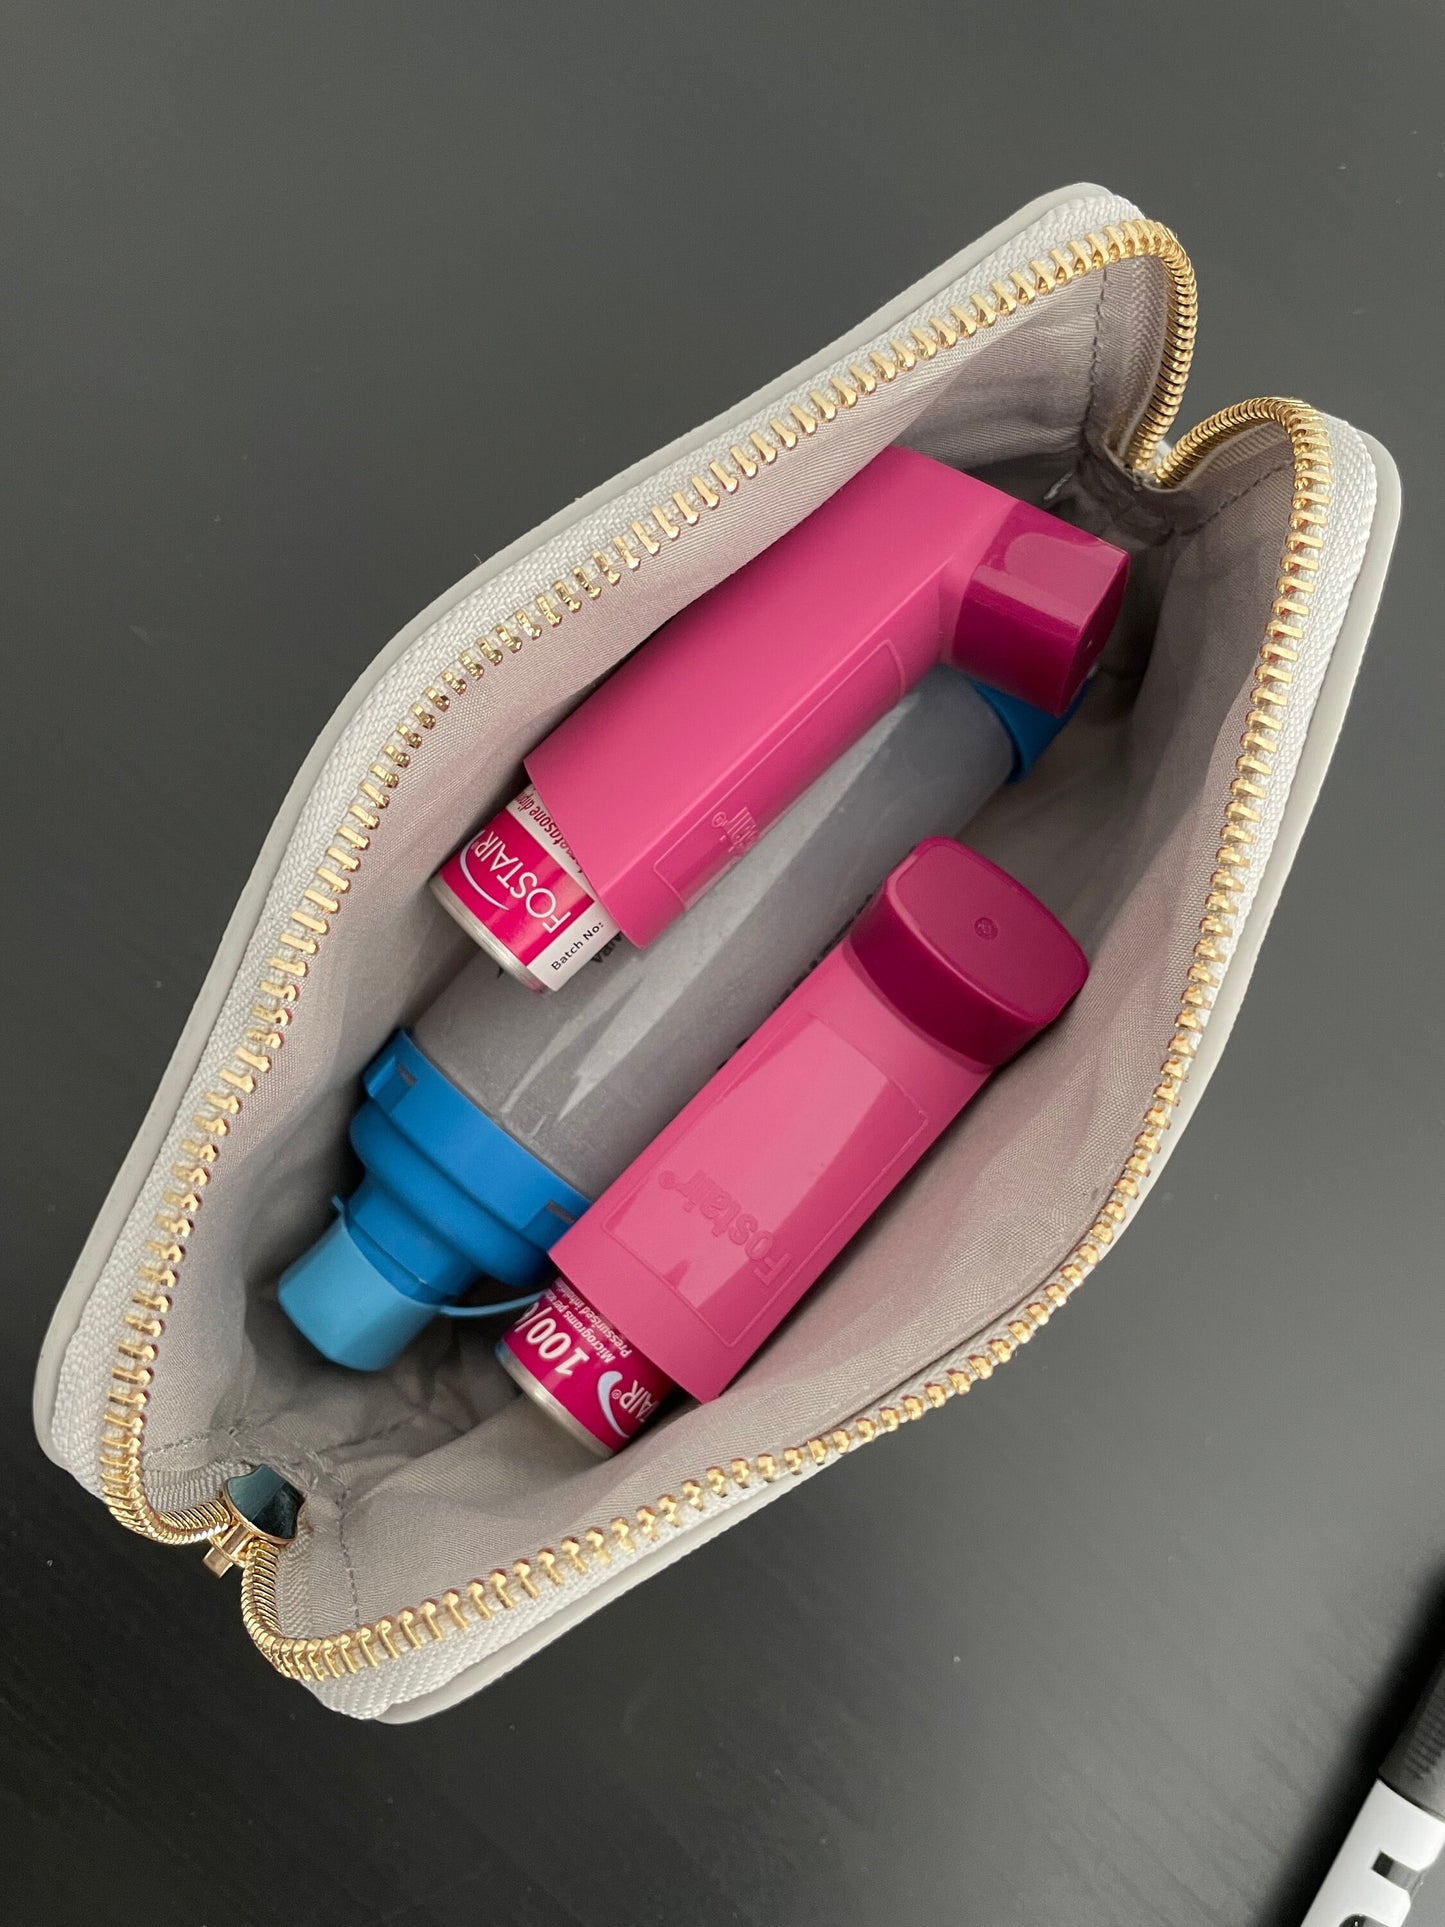 Inhaler Carry Case Holder , Faux Leather Pouch, Allergy Kit With Inhalers Inside